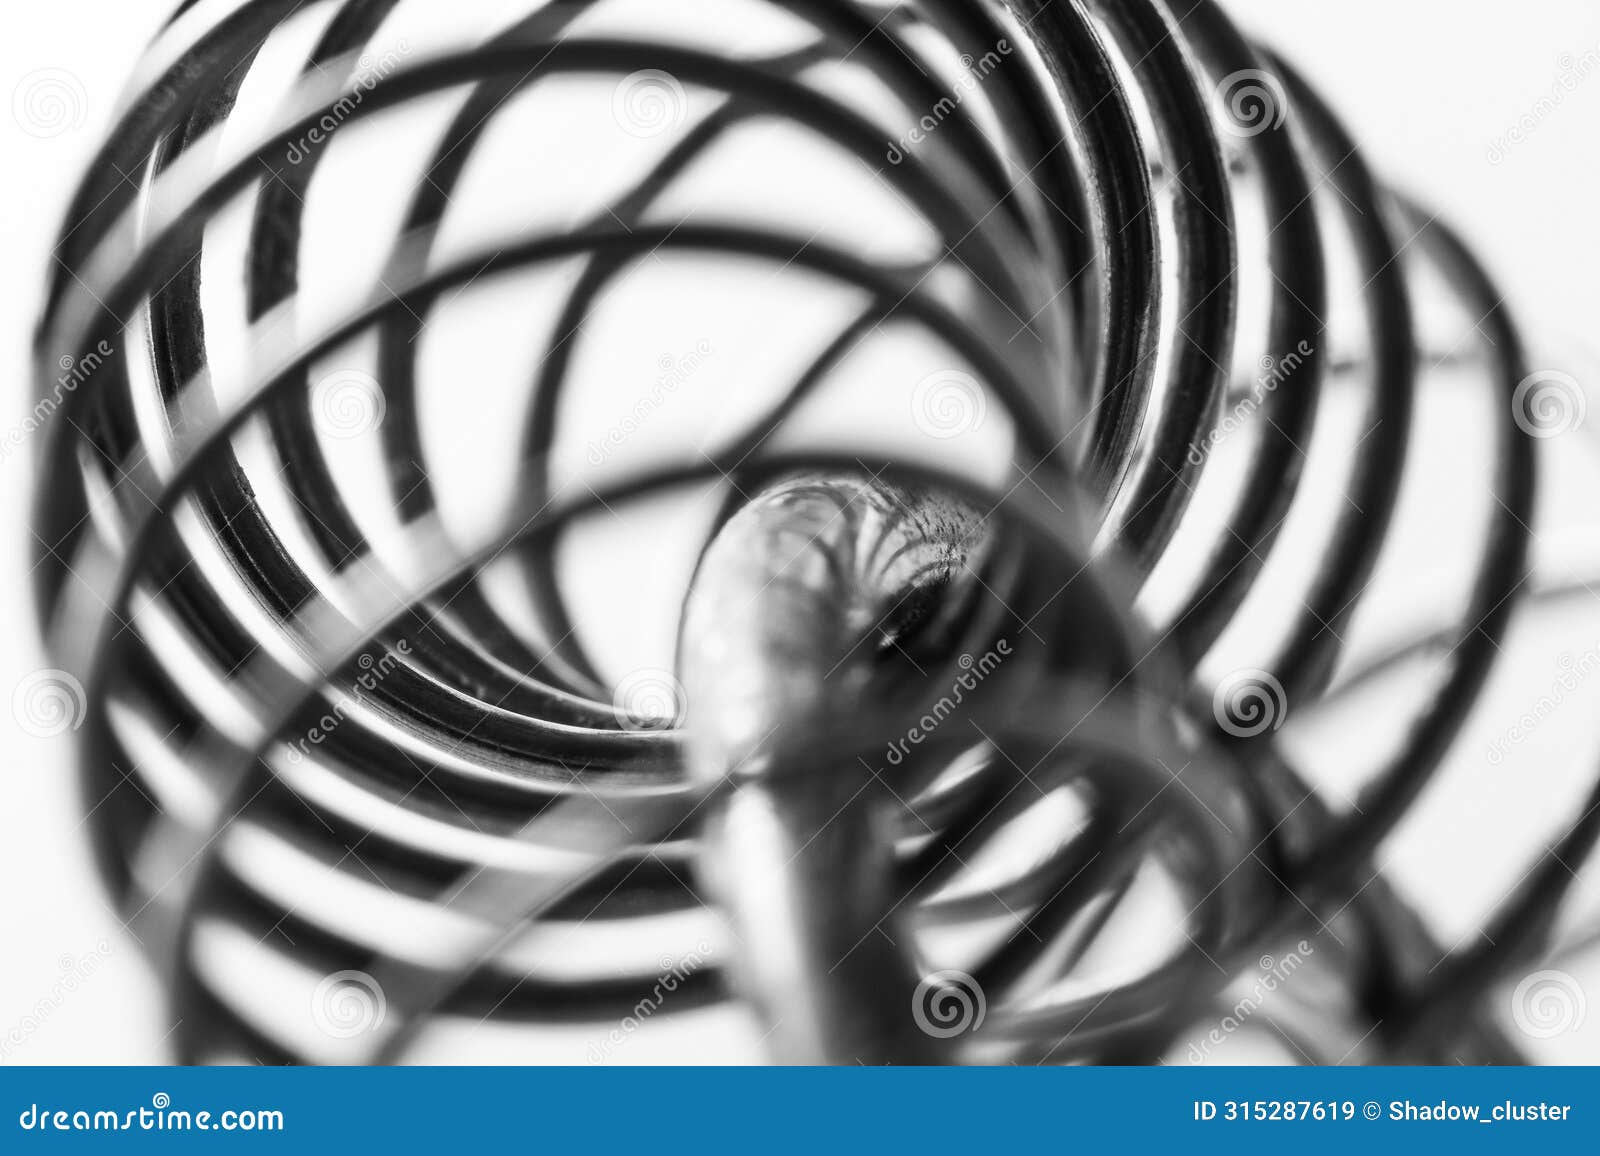 metal spring coiled, black and white macro shot